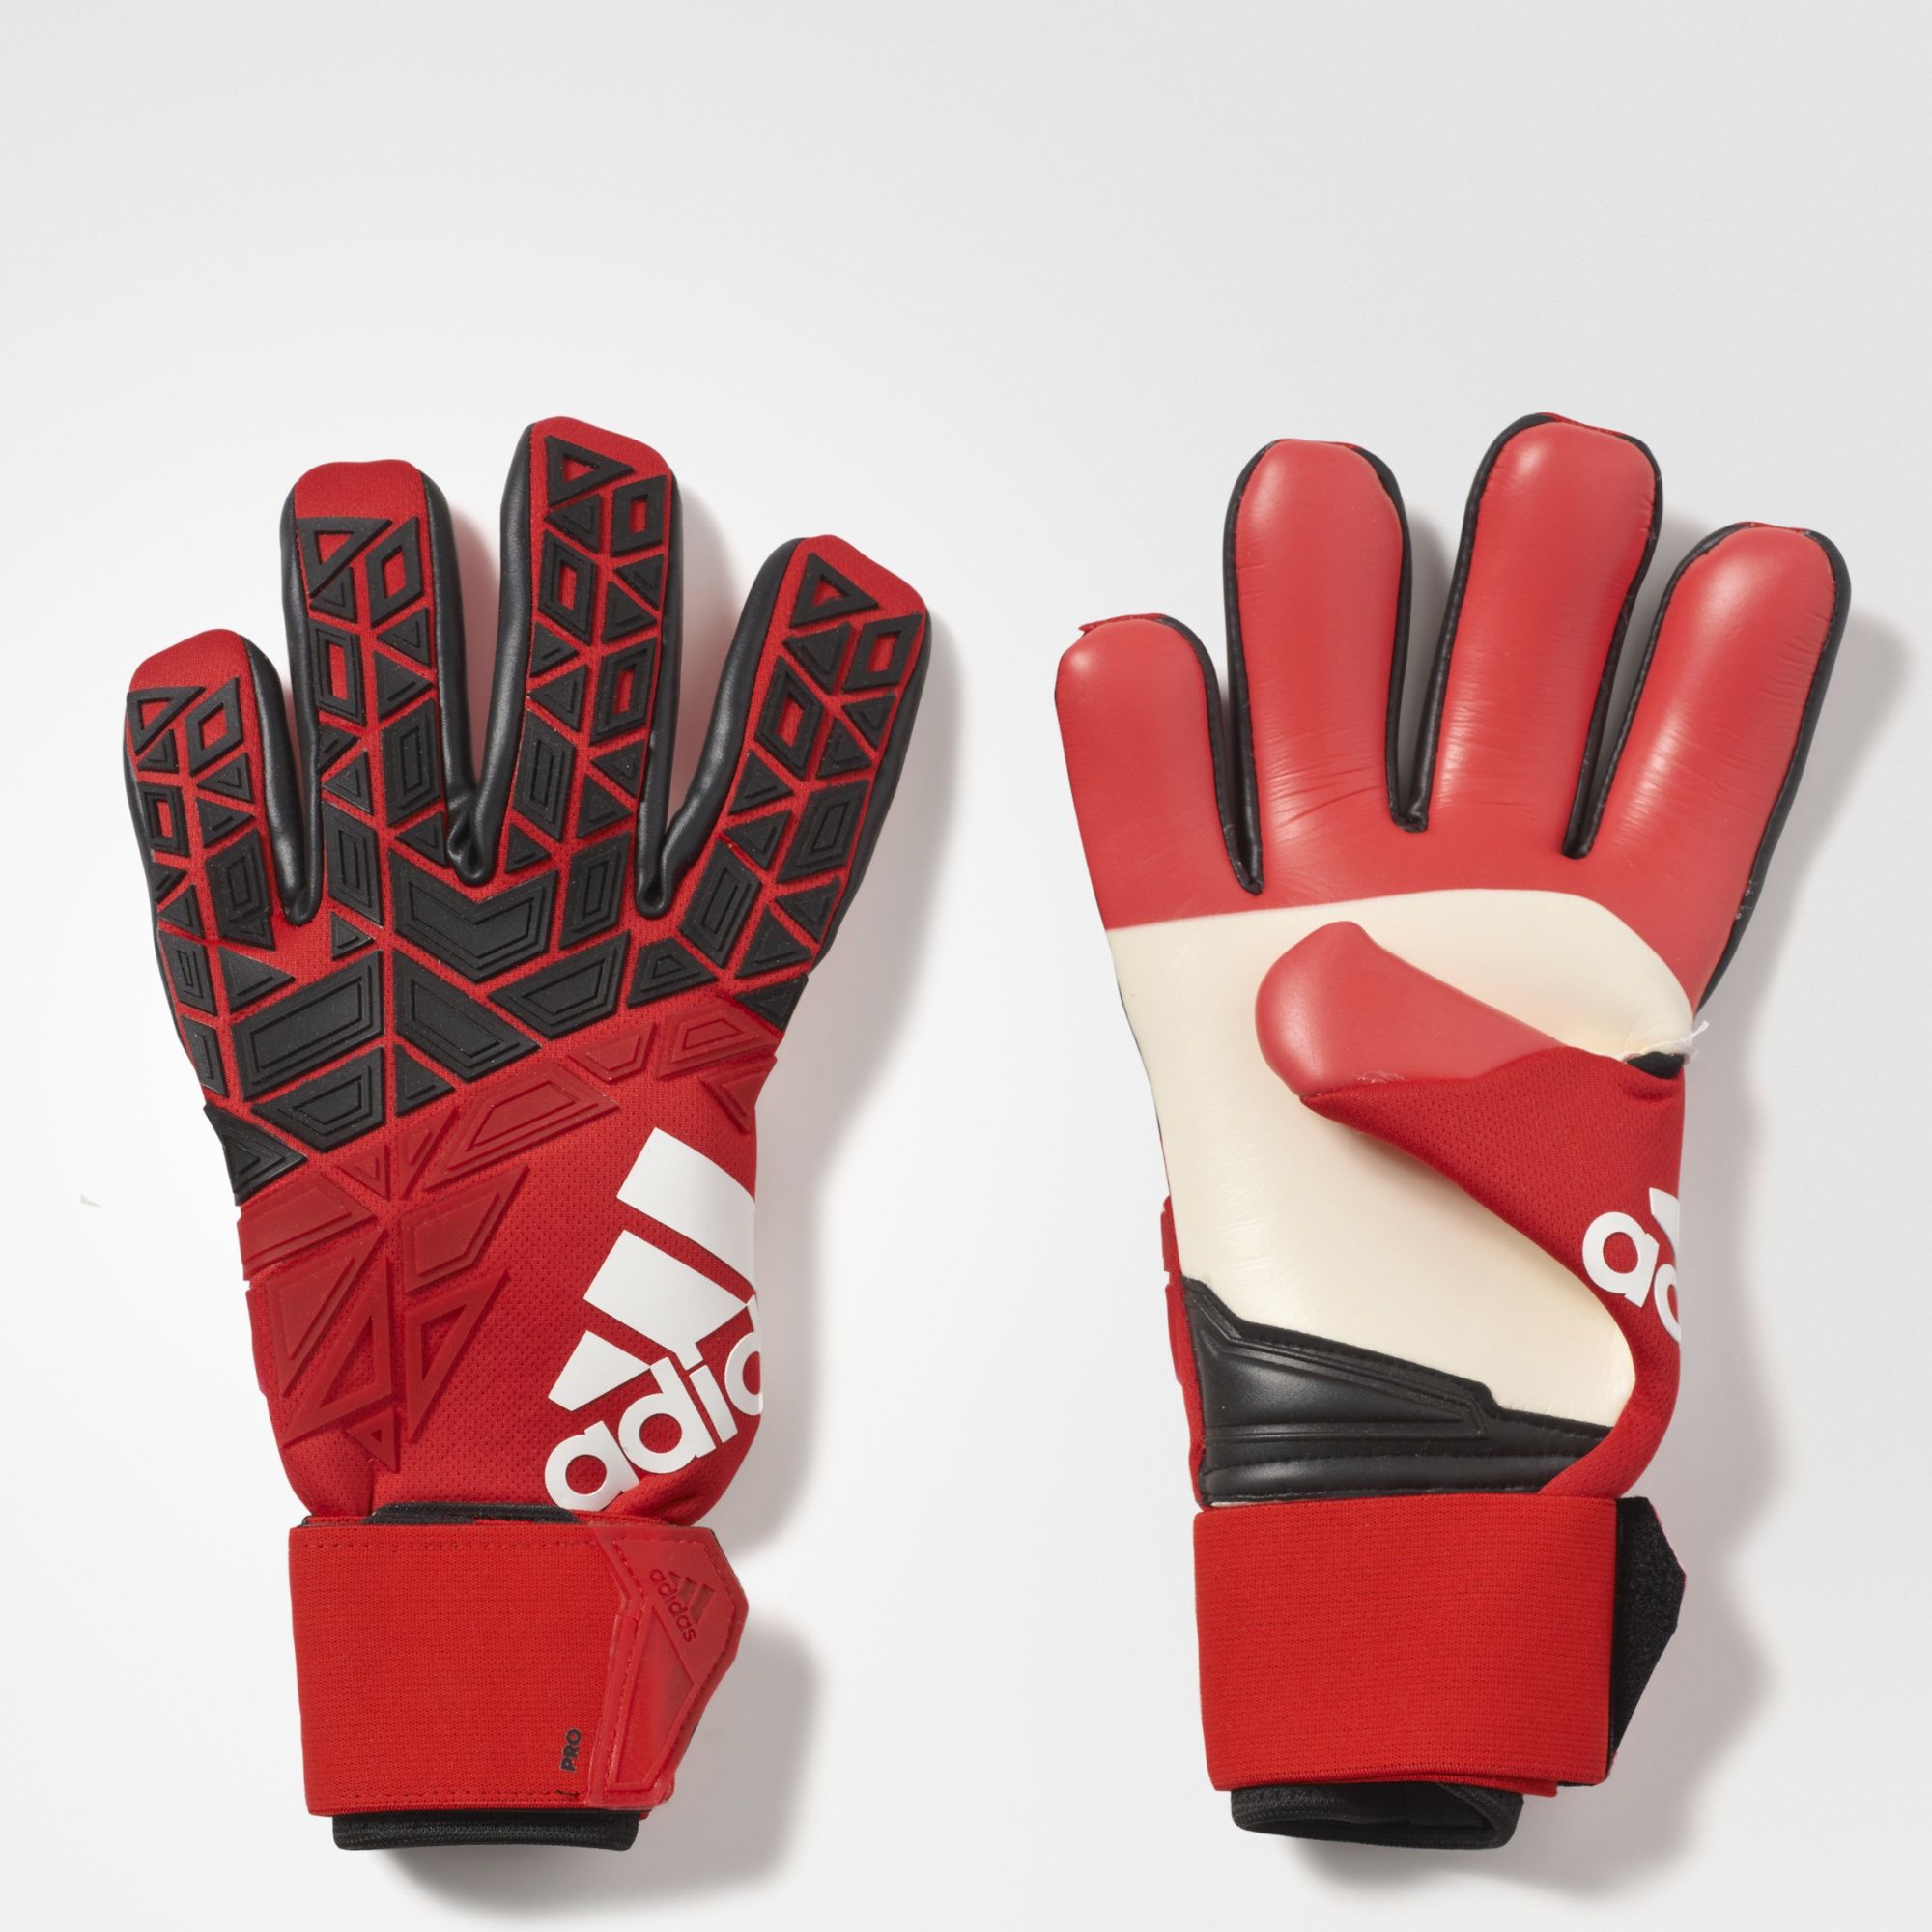 adidas ace trans pro red